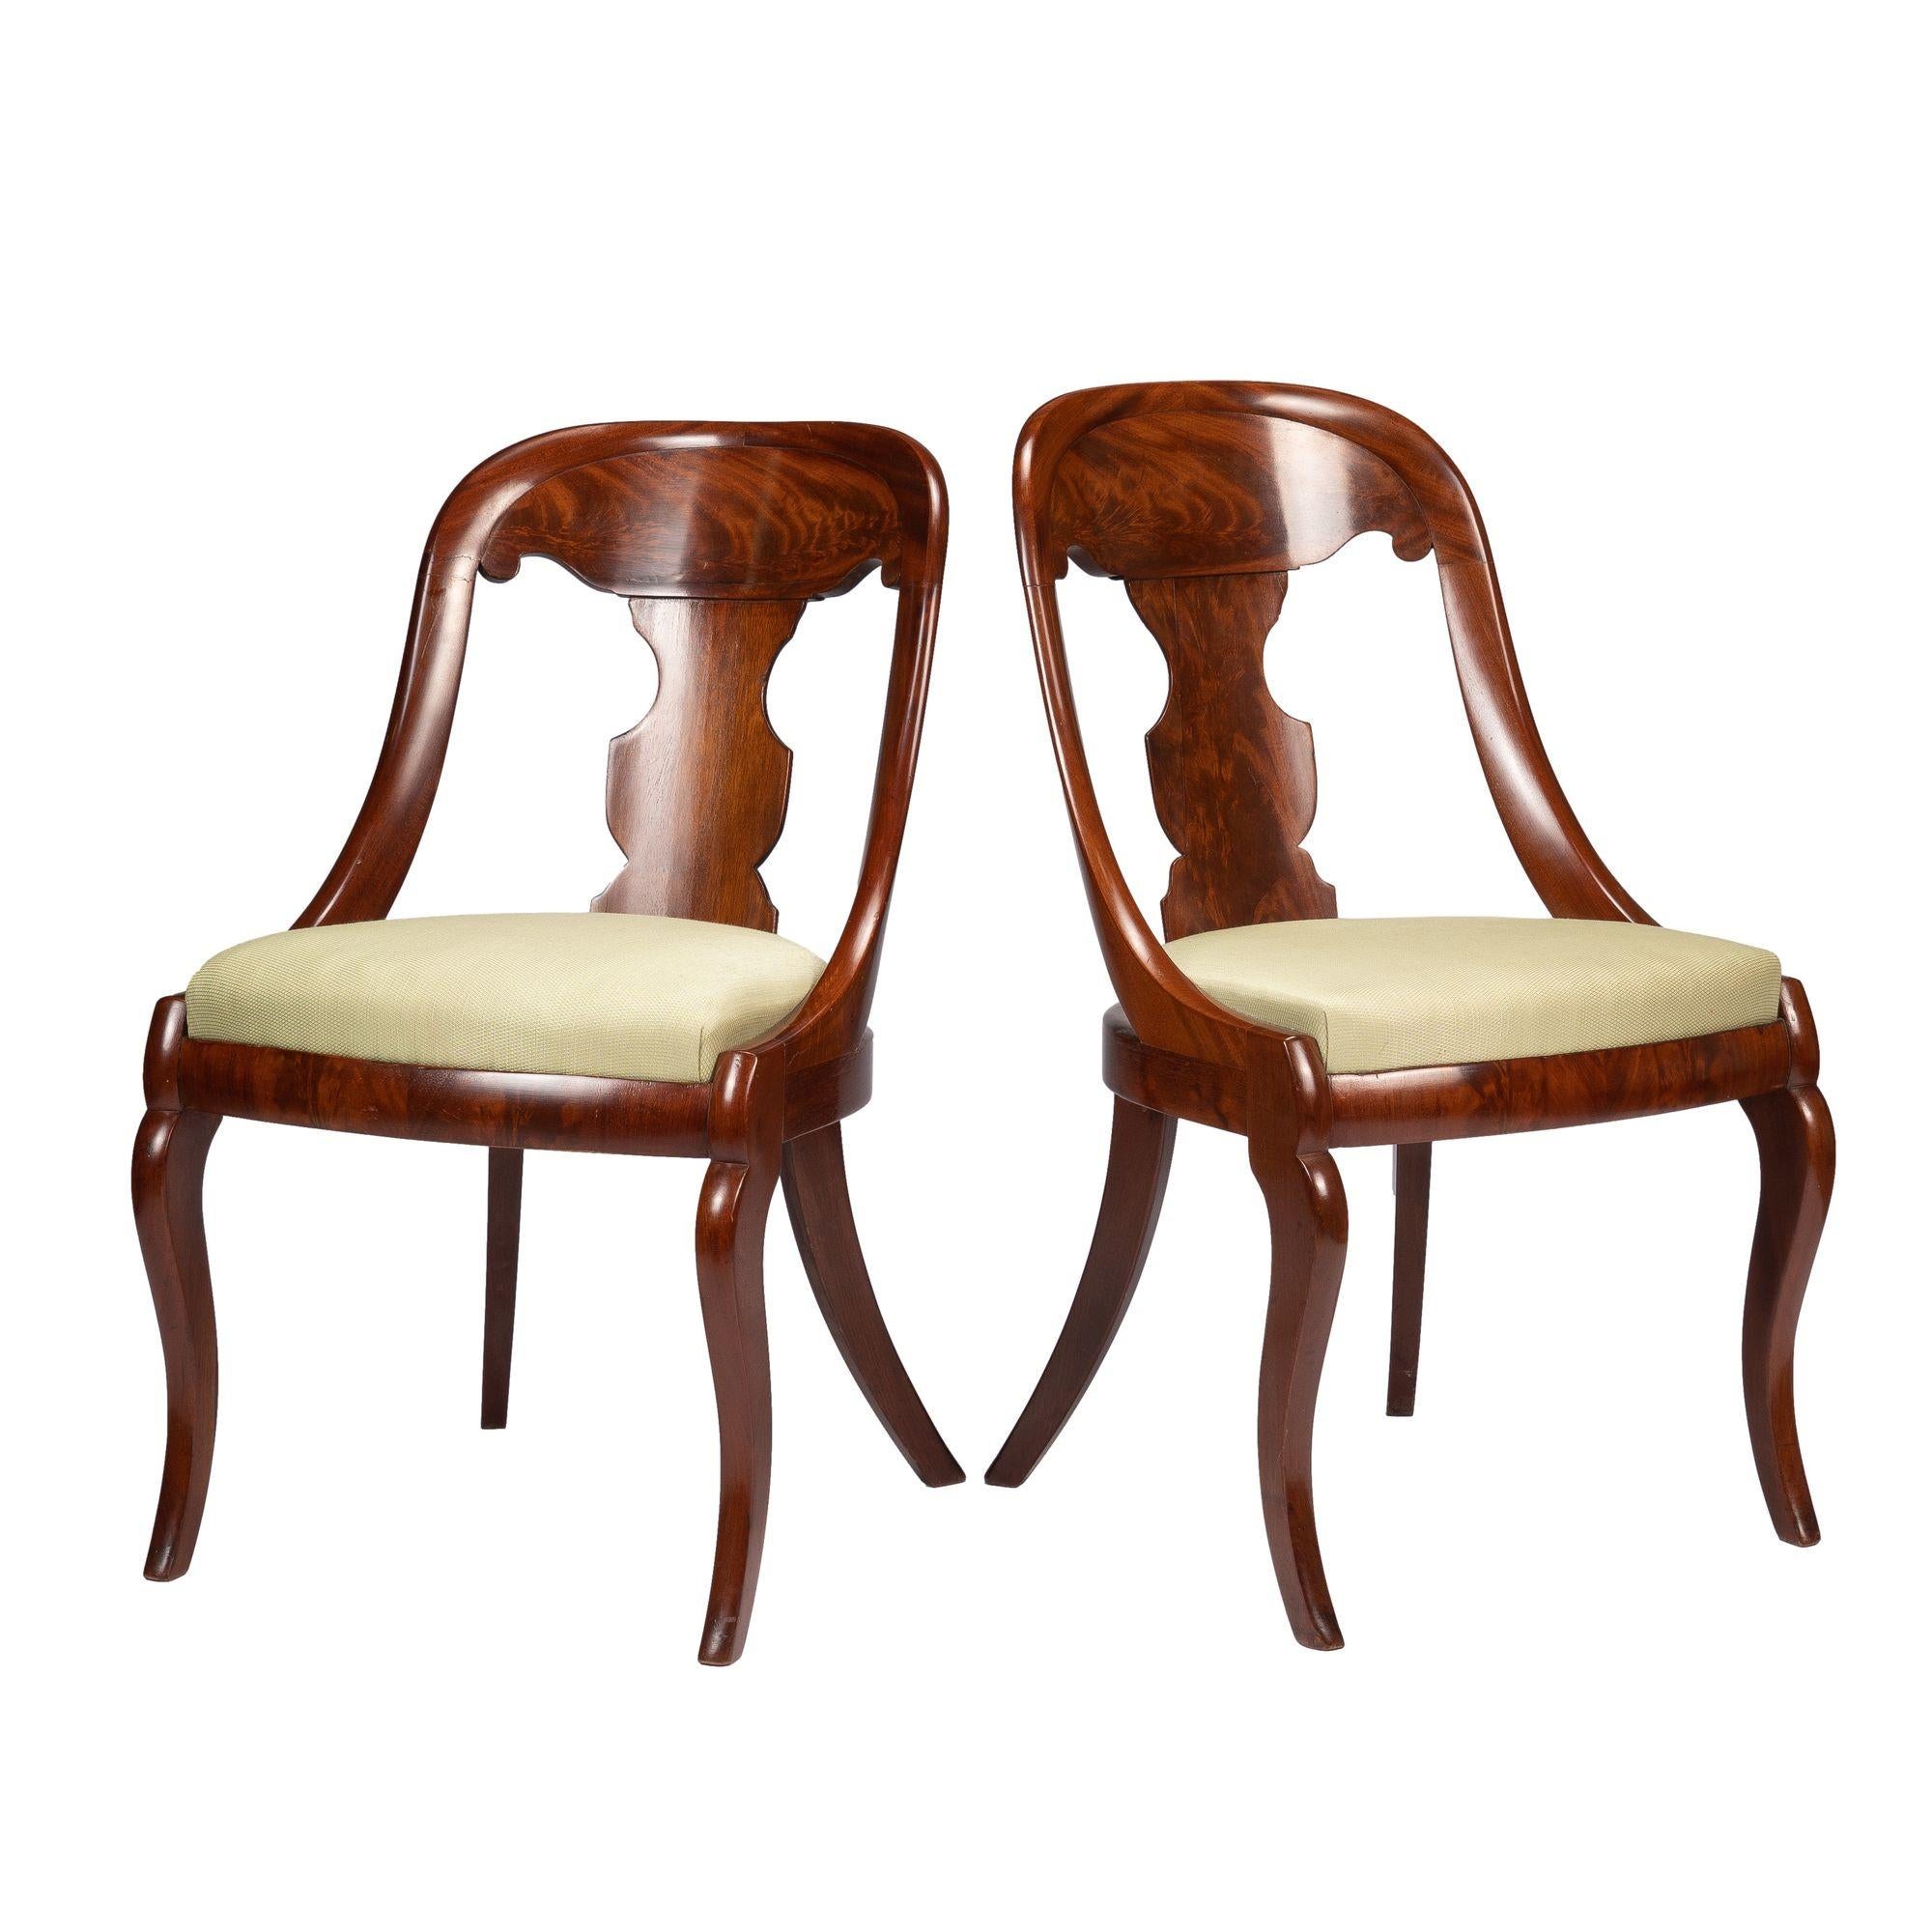 Pair of American Mahogany Gondola Chairs, 1815-35 For Sale 1